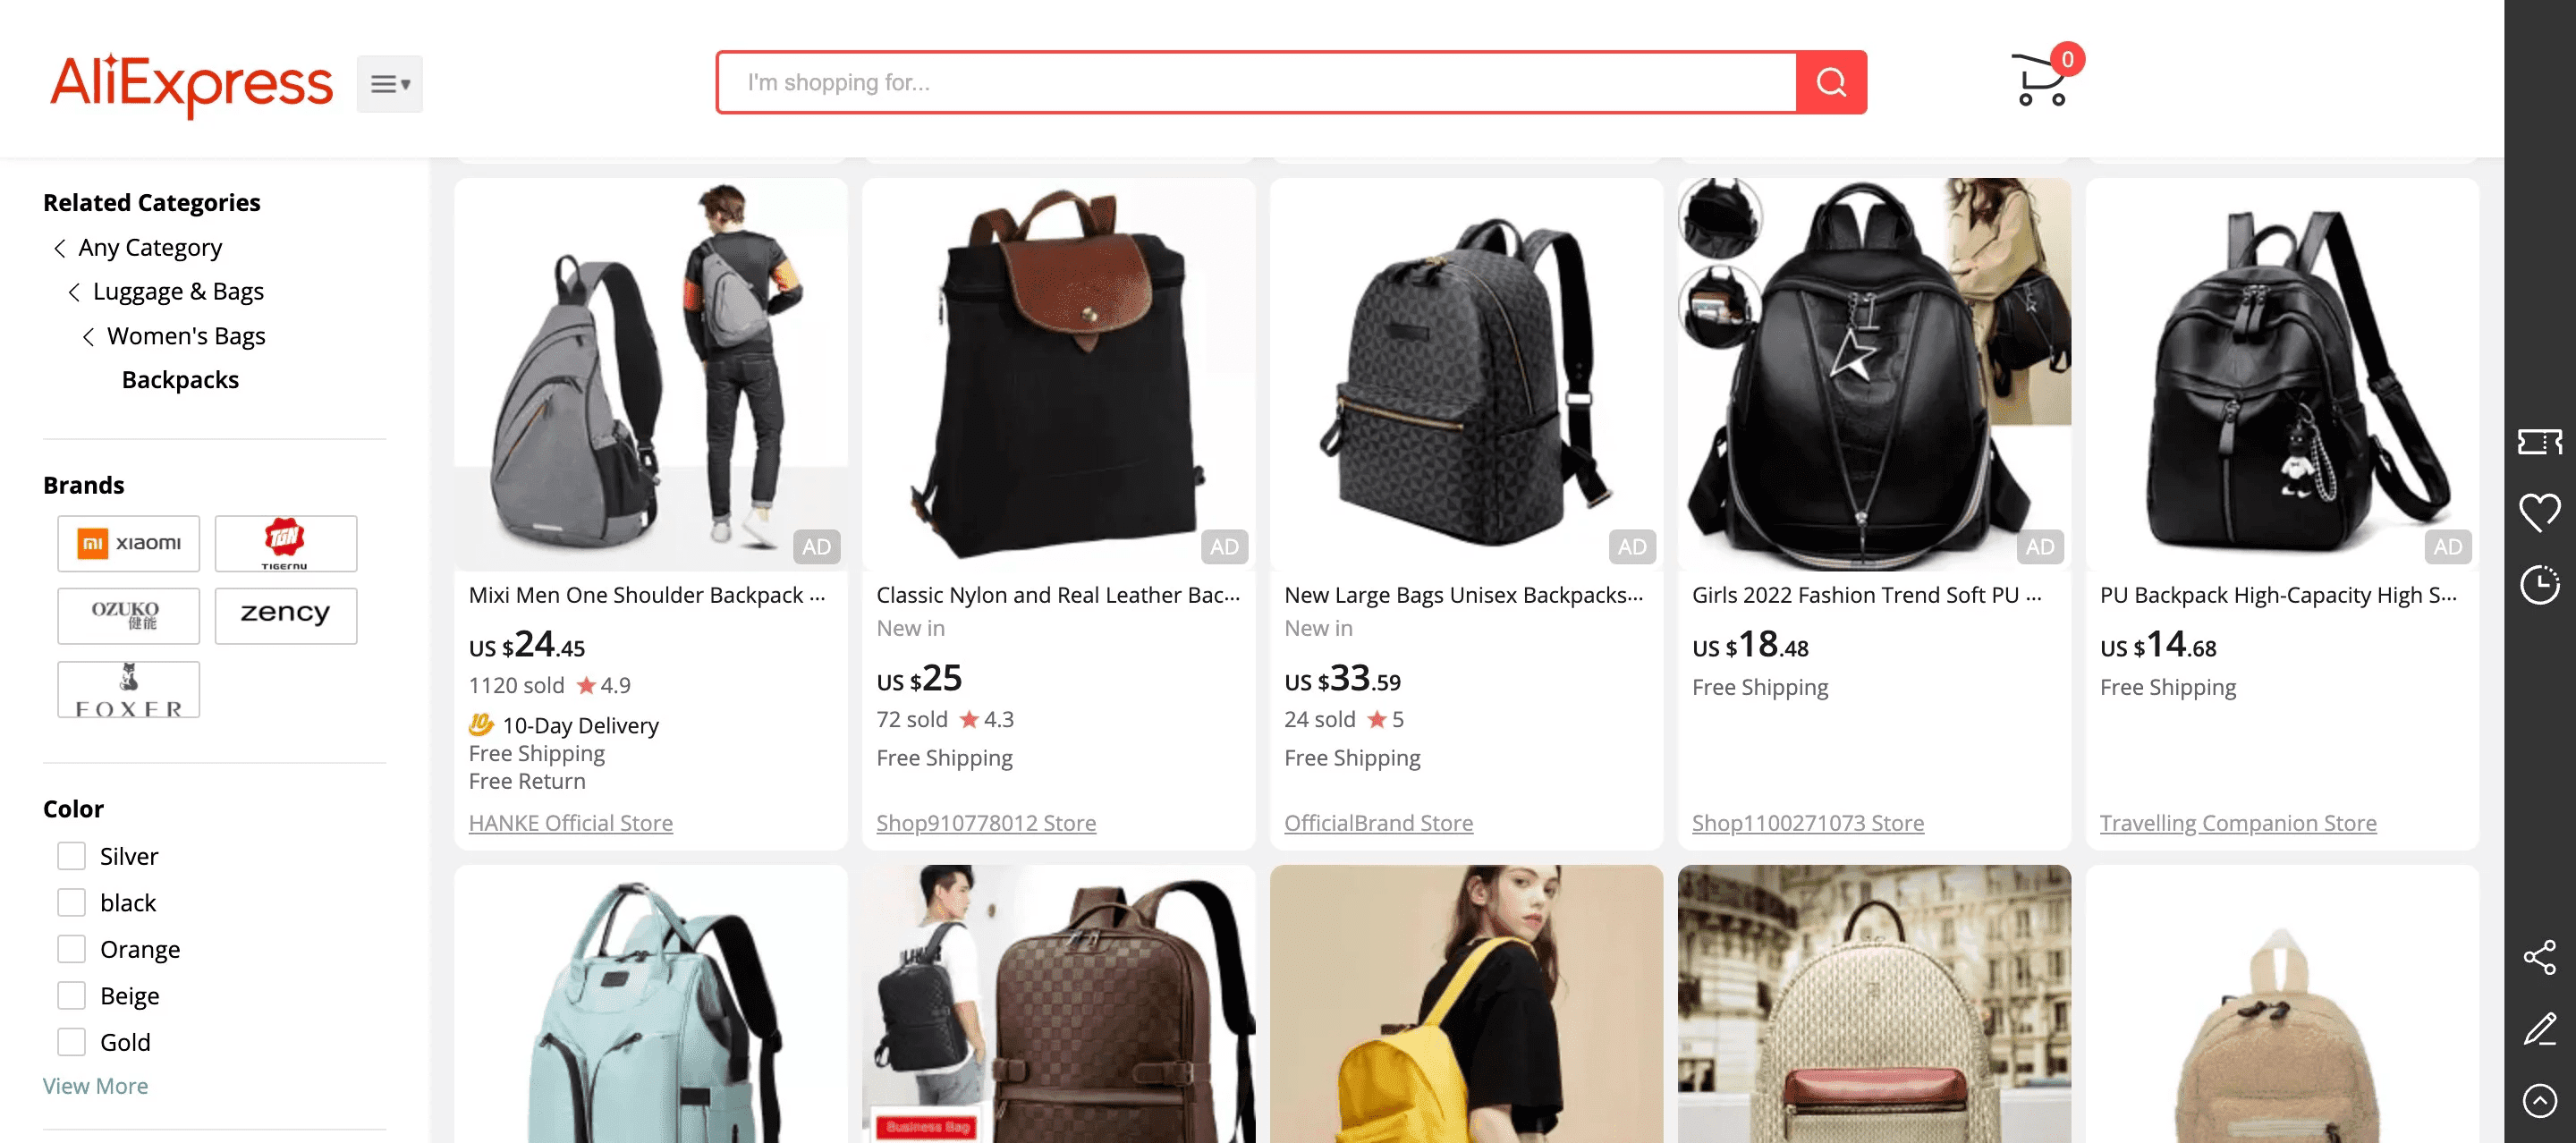 Aliexpress trending products for dropshipping: Bags & Shoes